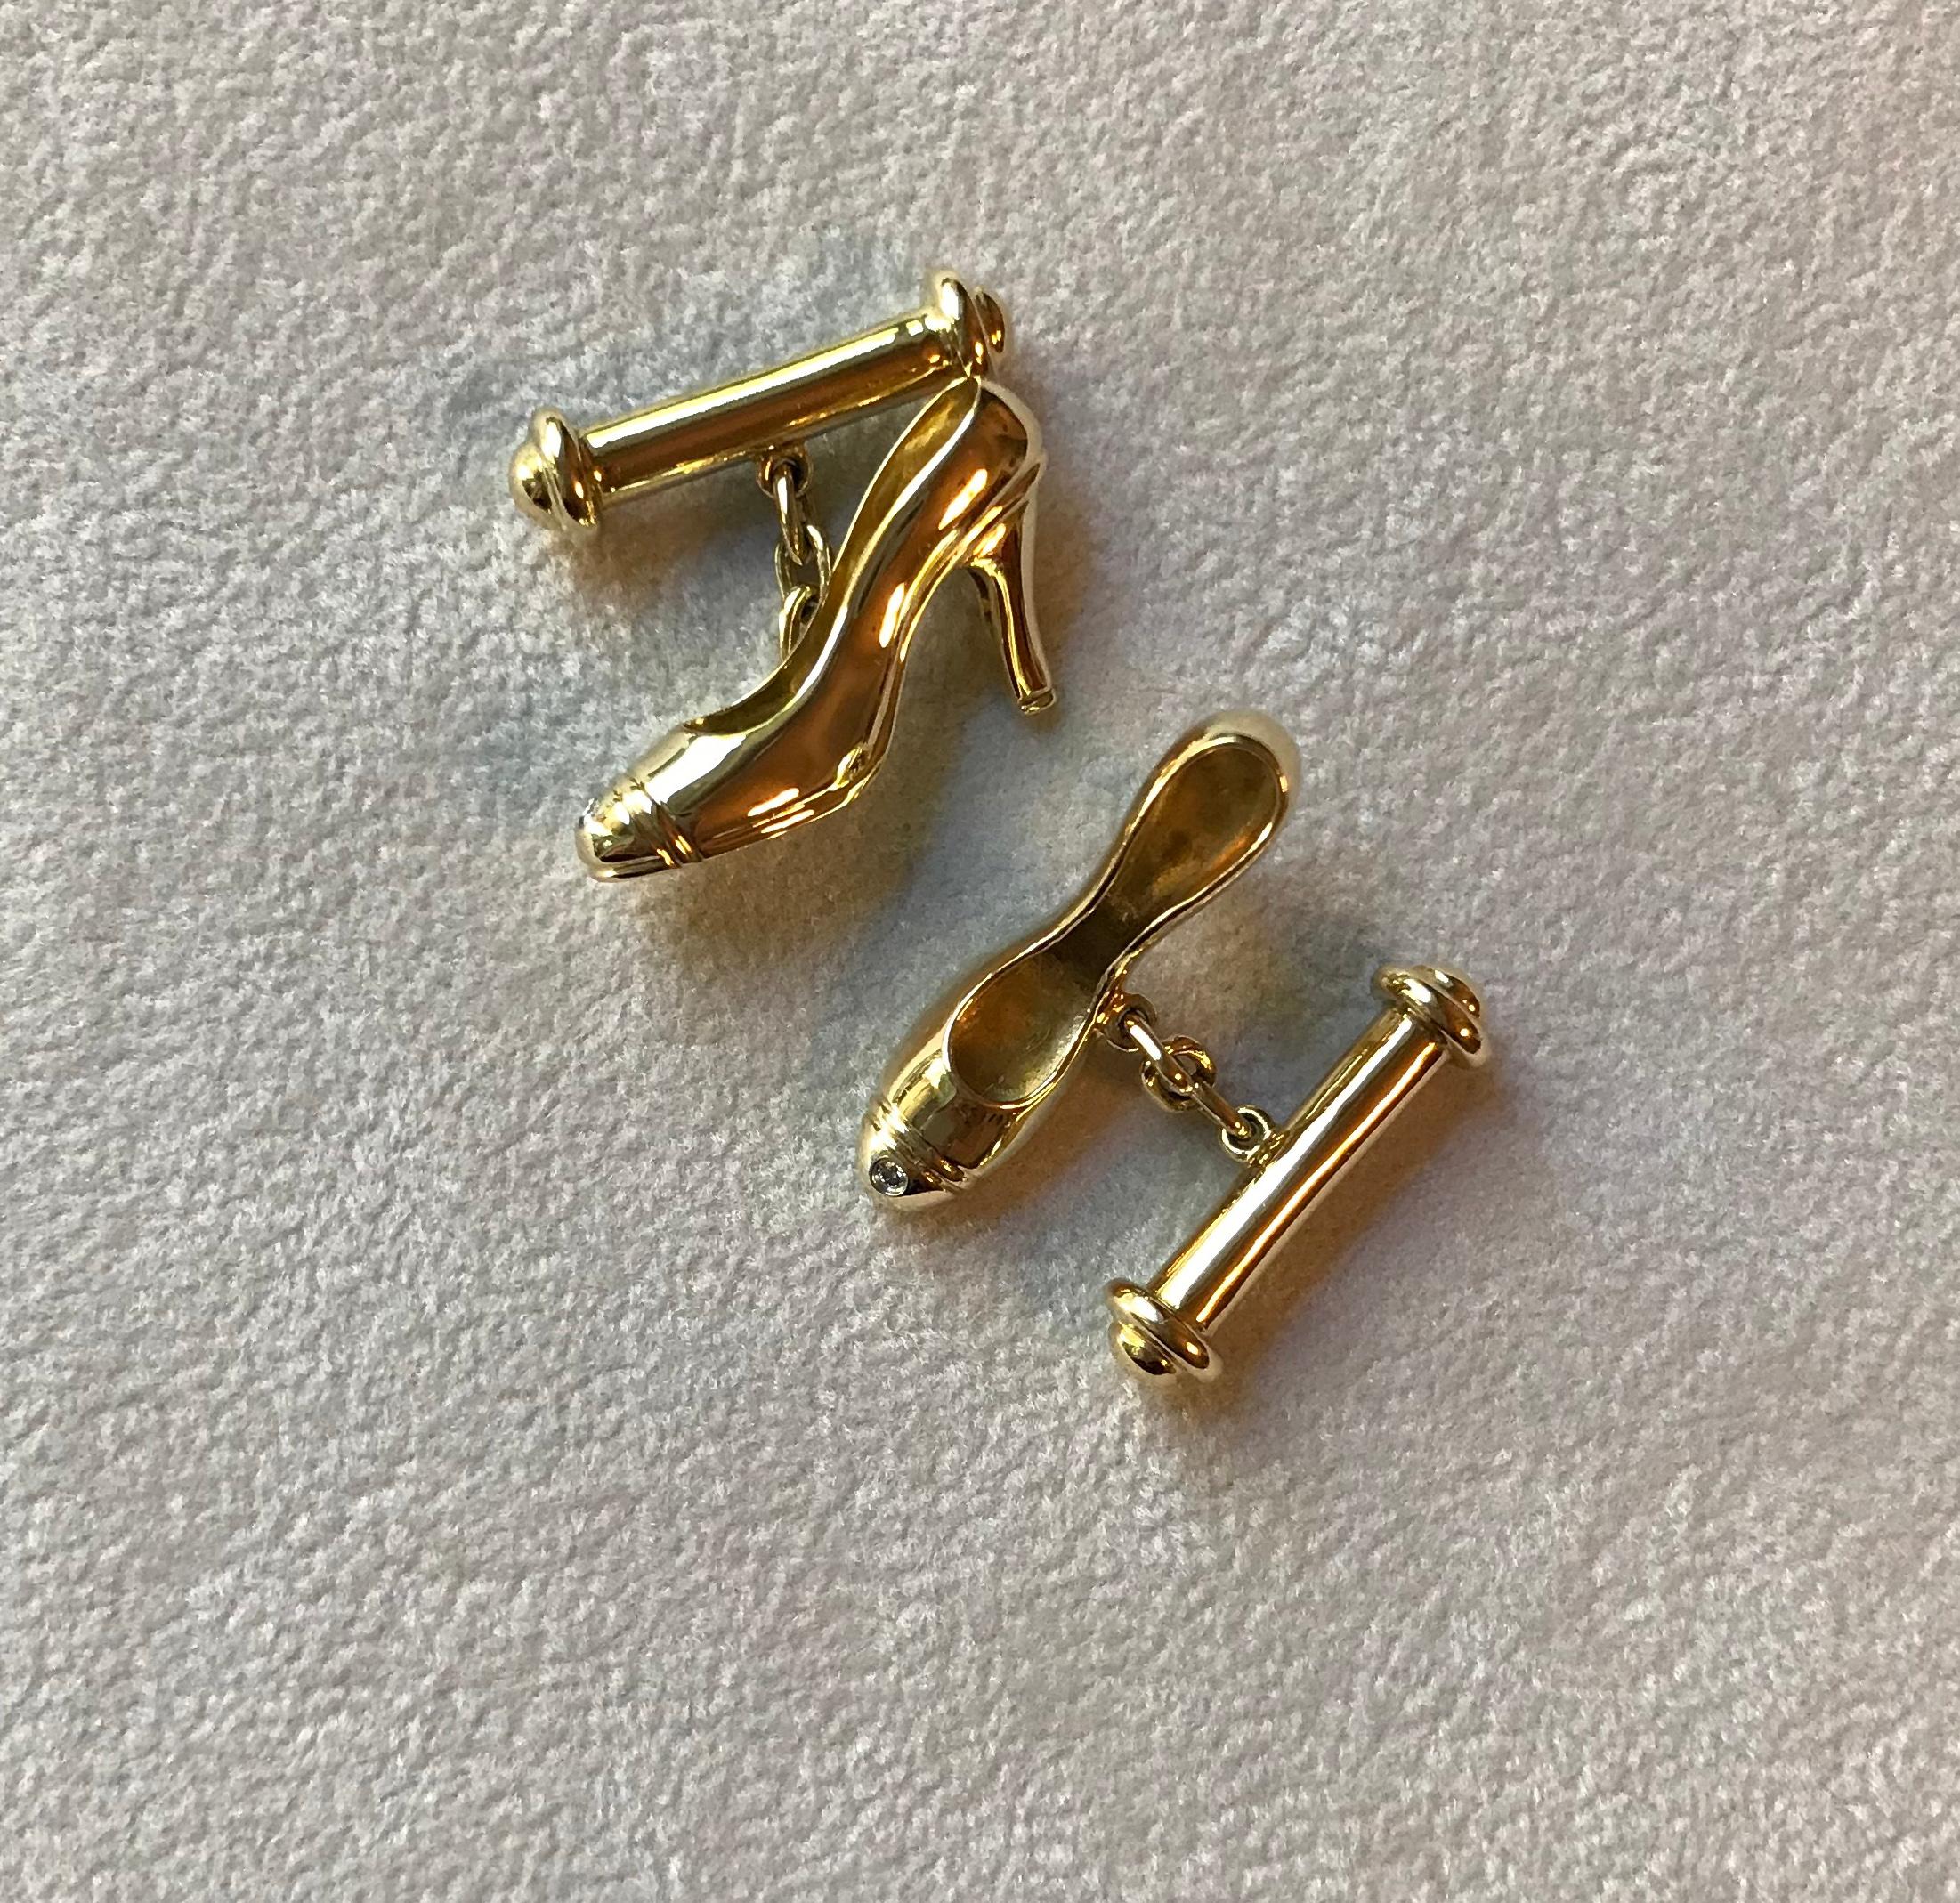 The delicate design of this pair of cufflinks makes it ideal also for a woman’s wardrobe. The entire piece is made of 18k yellow gold. The front face is shaped as a charming shoe with heels adorned at the top with a diamond. A chain-shaped post